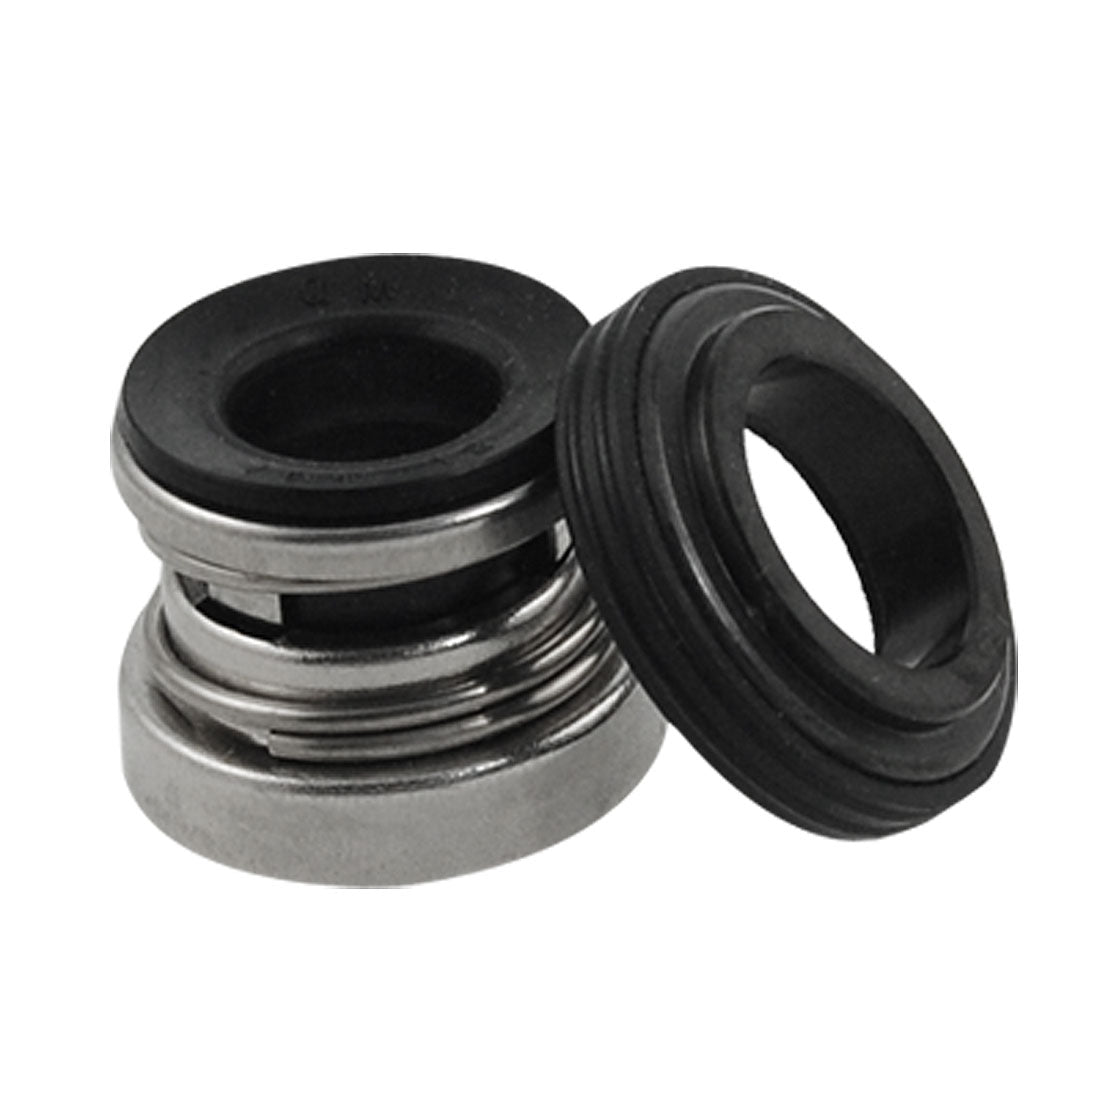 uxcell Uxcell 104-12 Single Spring Mechanical Shaft Seal 12mm for Pump